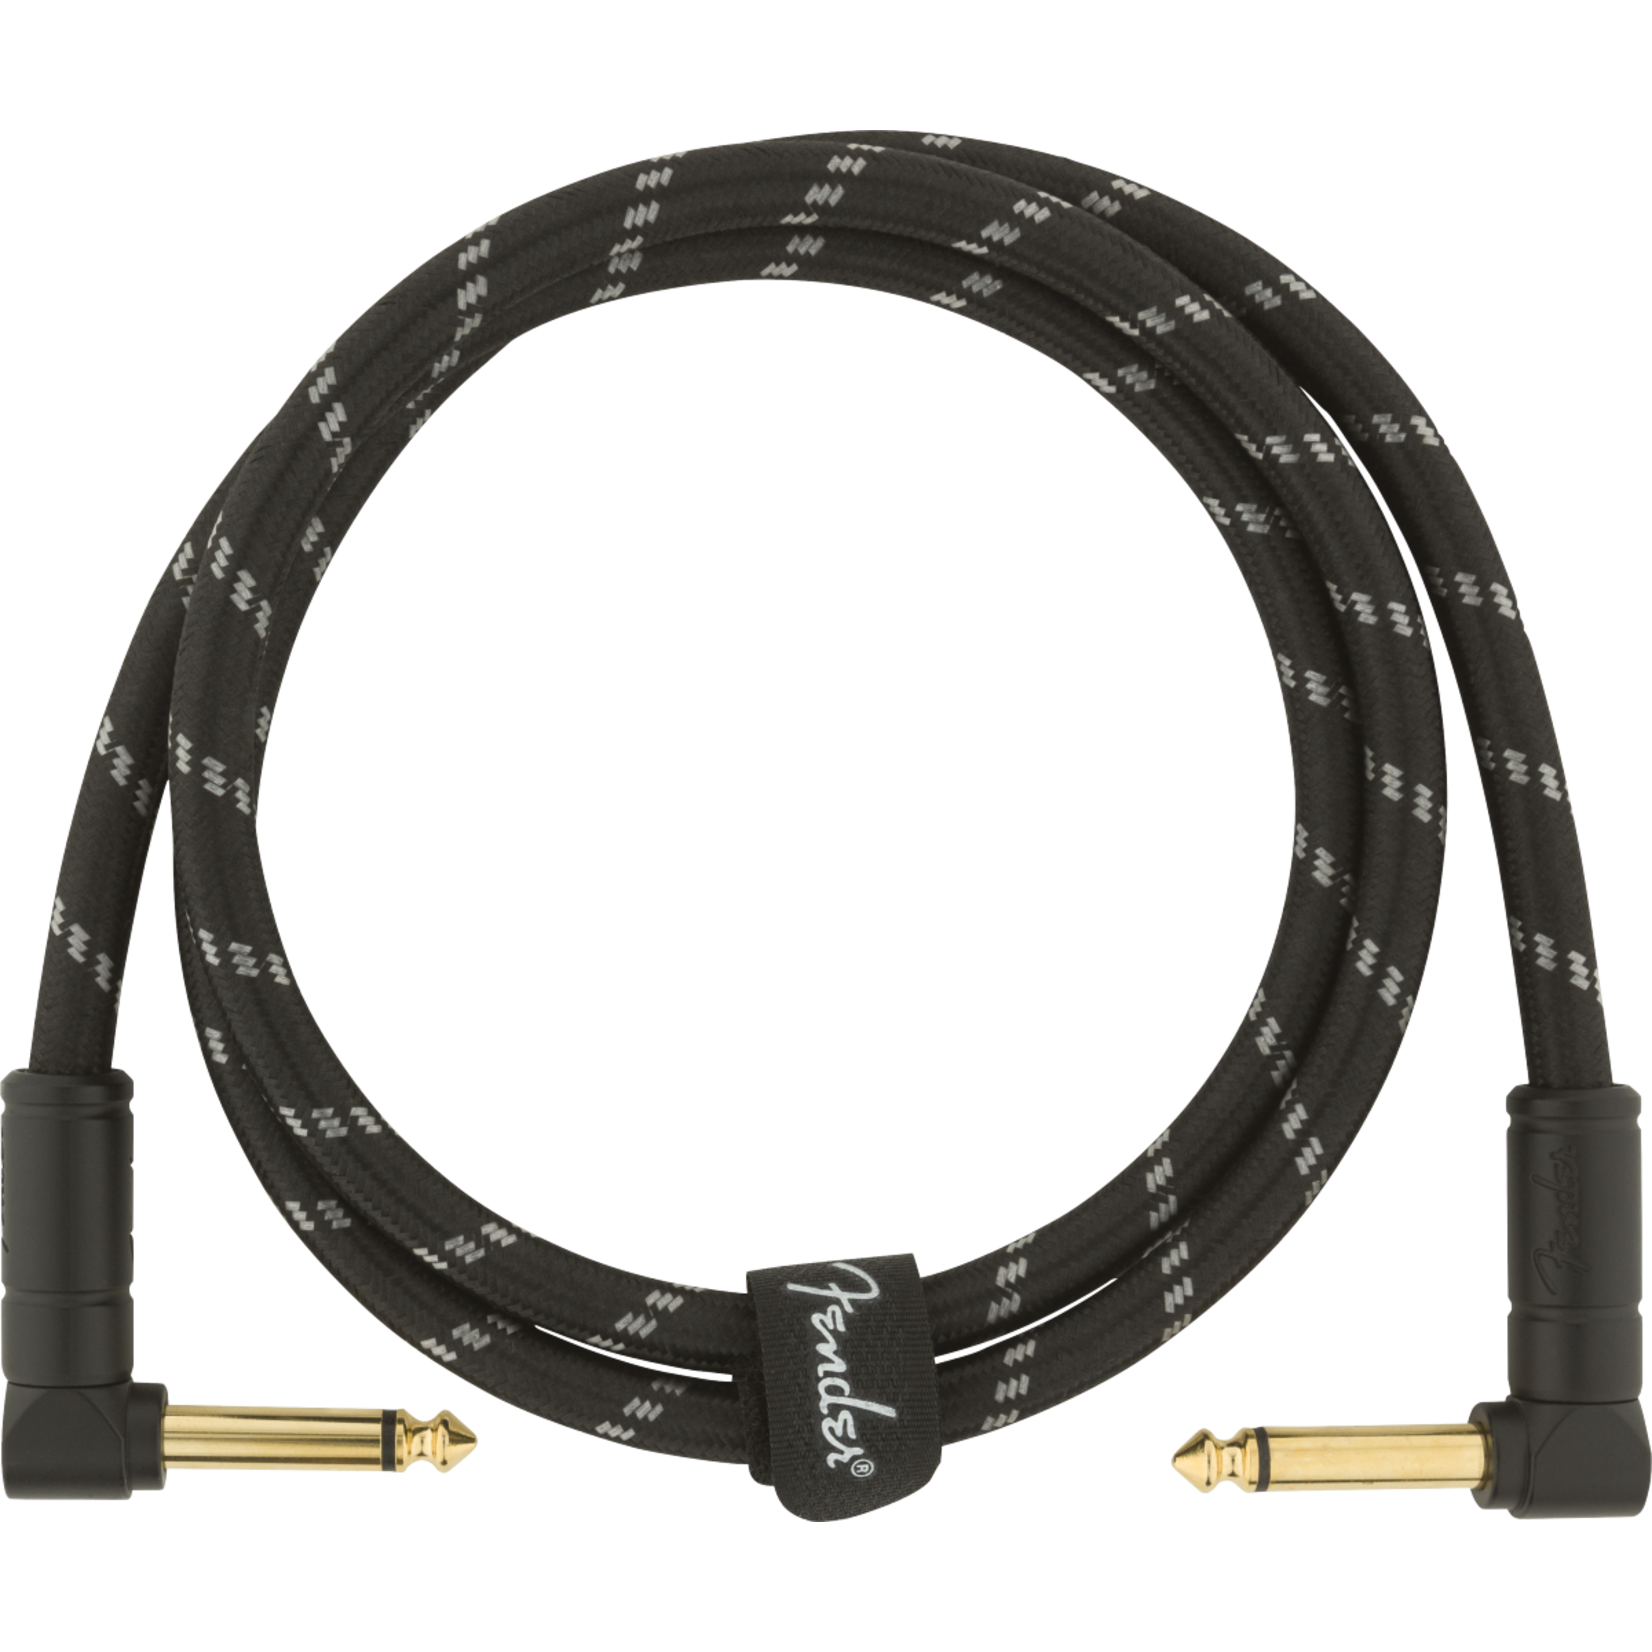 Fender Deluxe Series Instrument Cable, Angle/Angle, 3' - Black Tweed